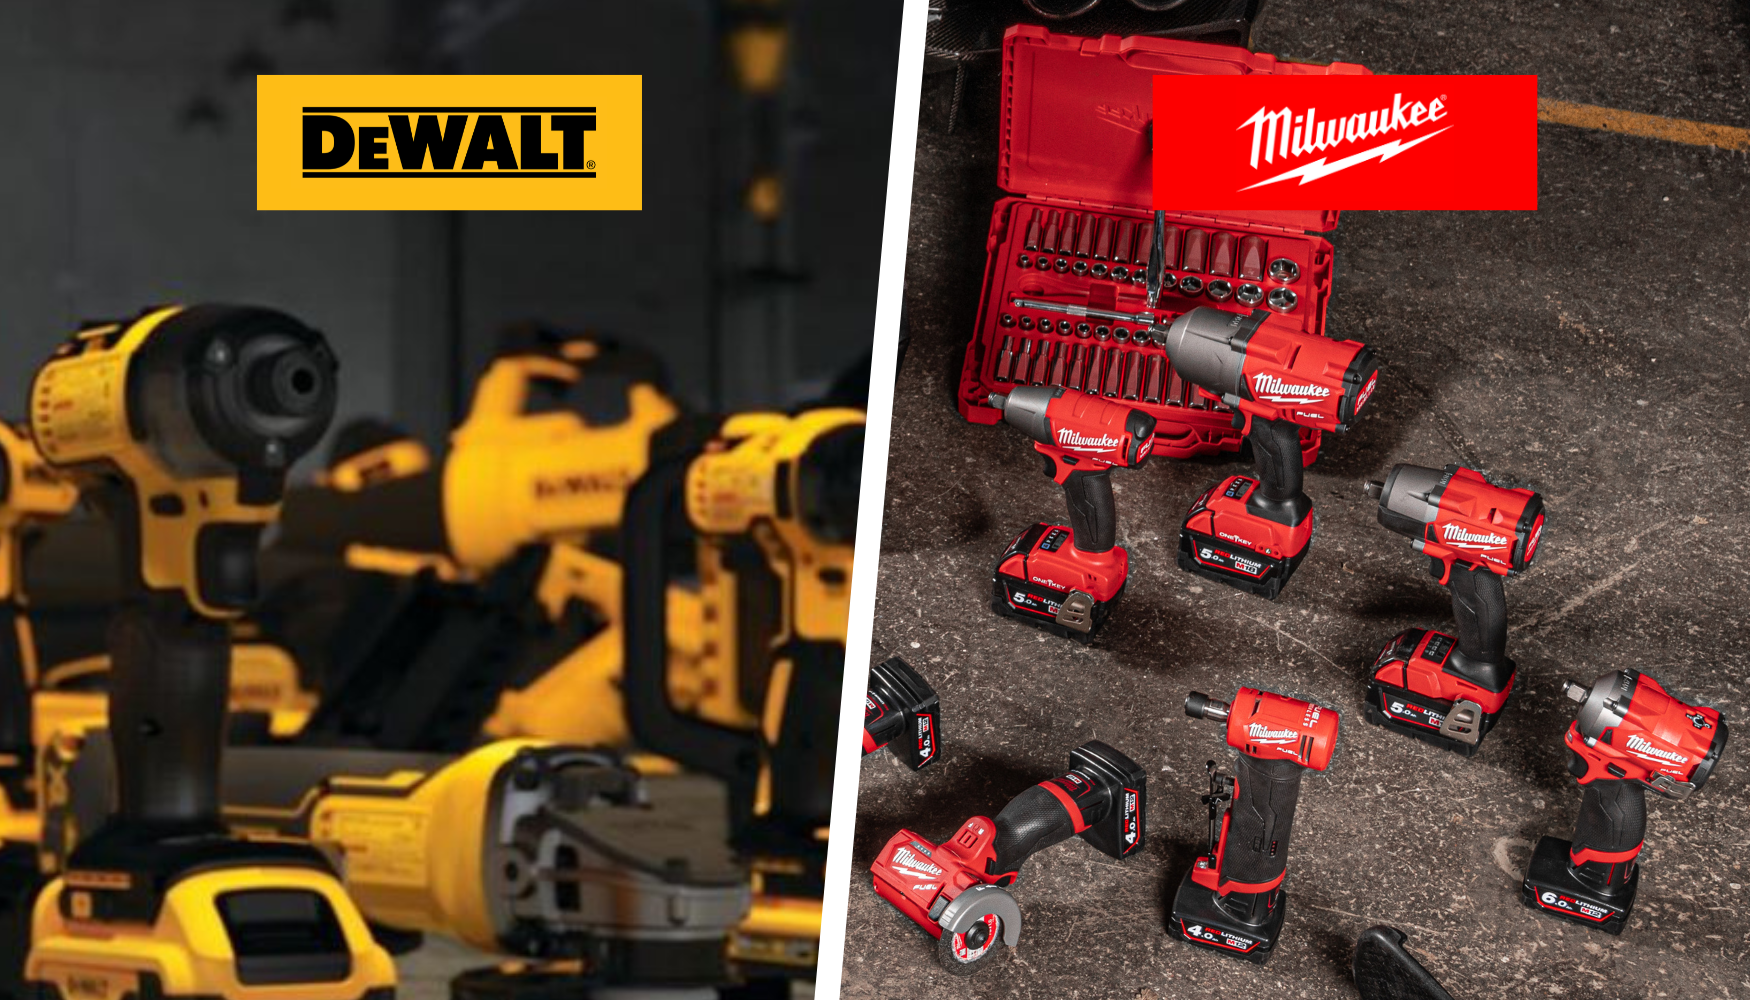 DeWalt and Milwaukee are both good options if you want a good power tool at a good price but you don't want to compromise on quality this Black Friday